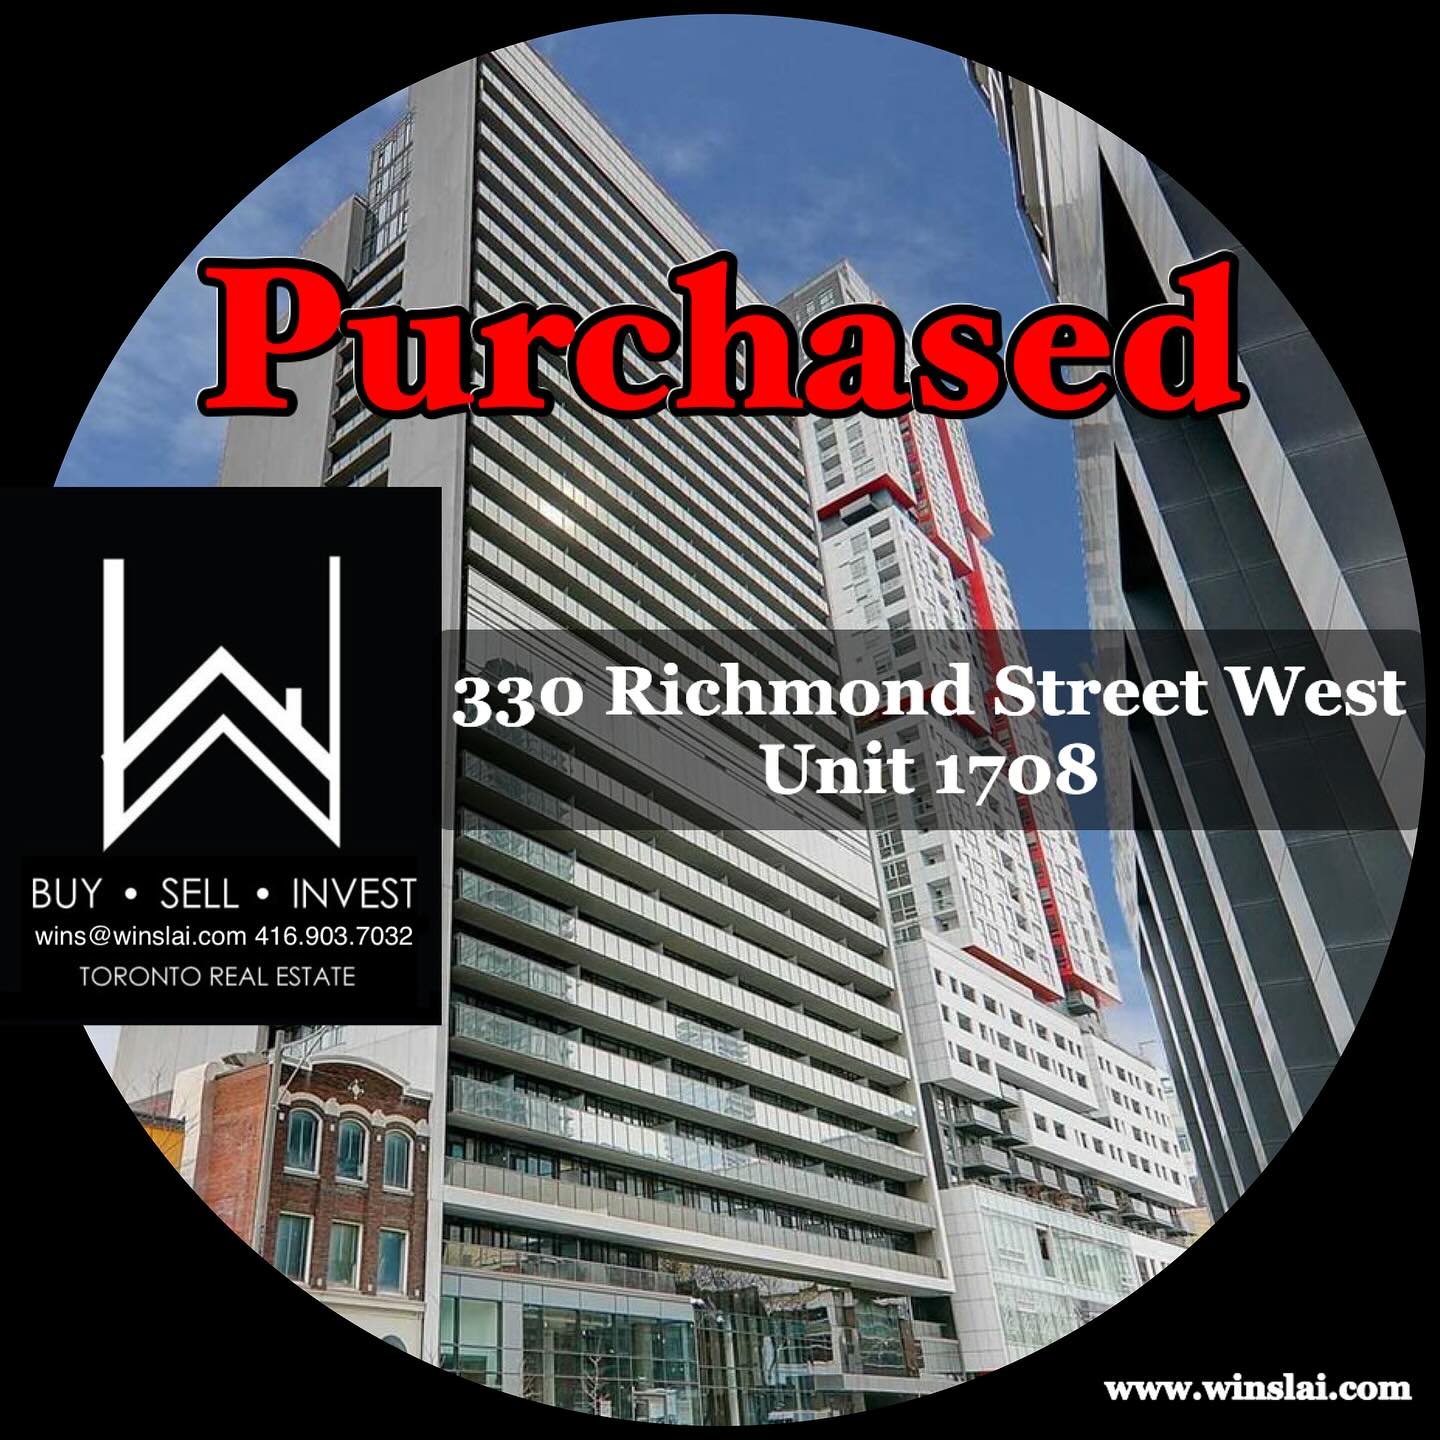 Purchased flyer for 380 Richmond St W condo.